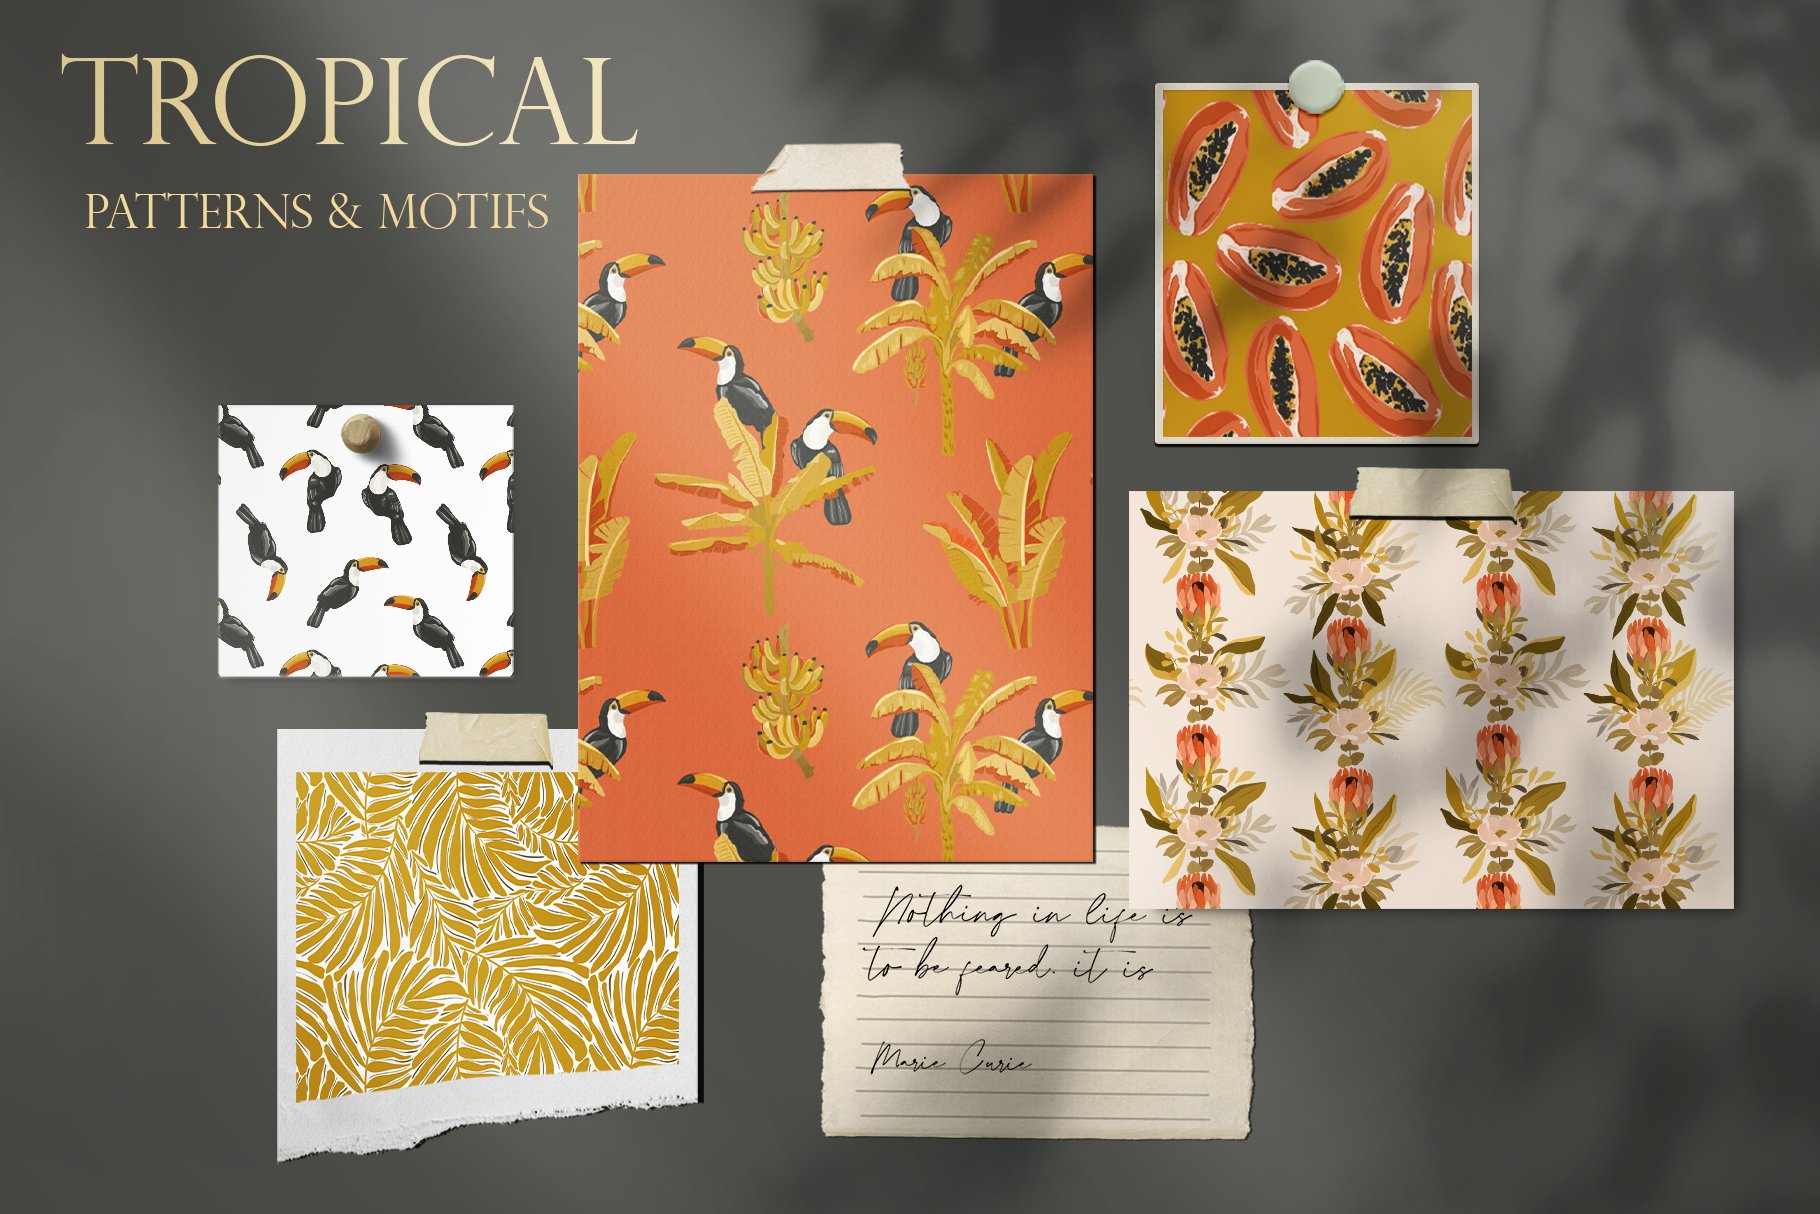 Collection of tropical patterns and motifs.